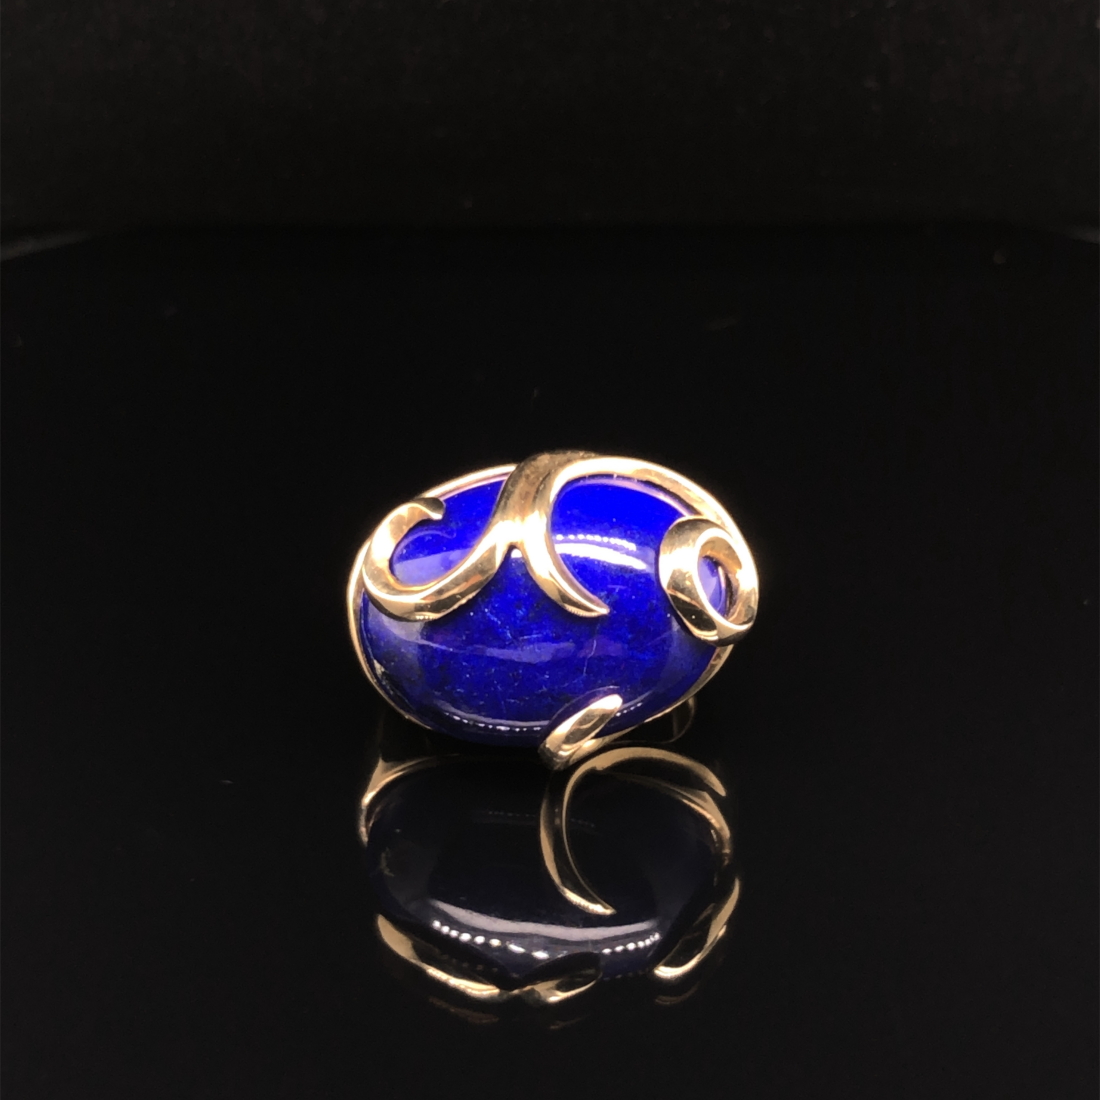 A CONTEMPORARY LAPIS LAZULI AND 9ct HALLMARKED GOLD RING. FINGER SIZE K. WEIGHT 8.73grms. - Image 4 of 8